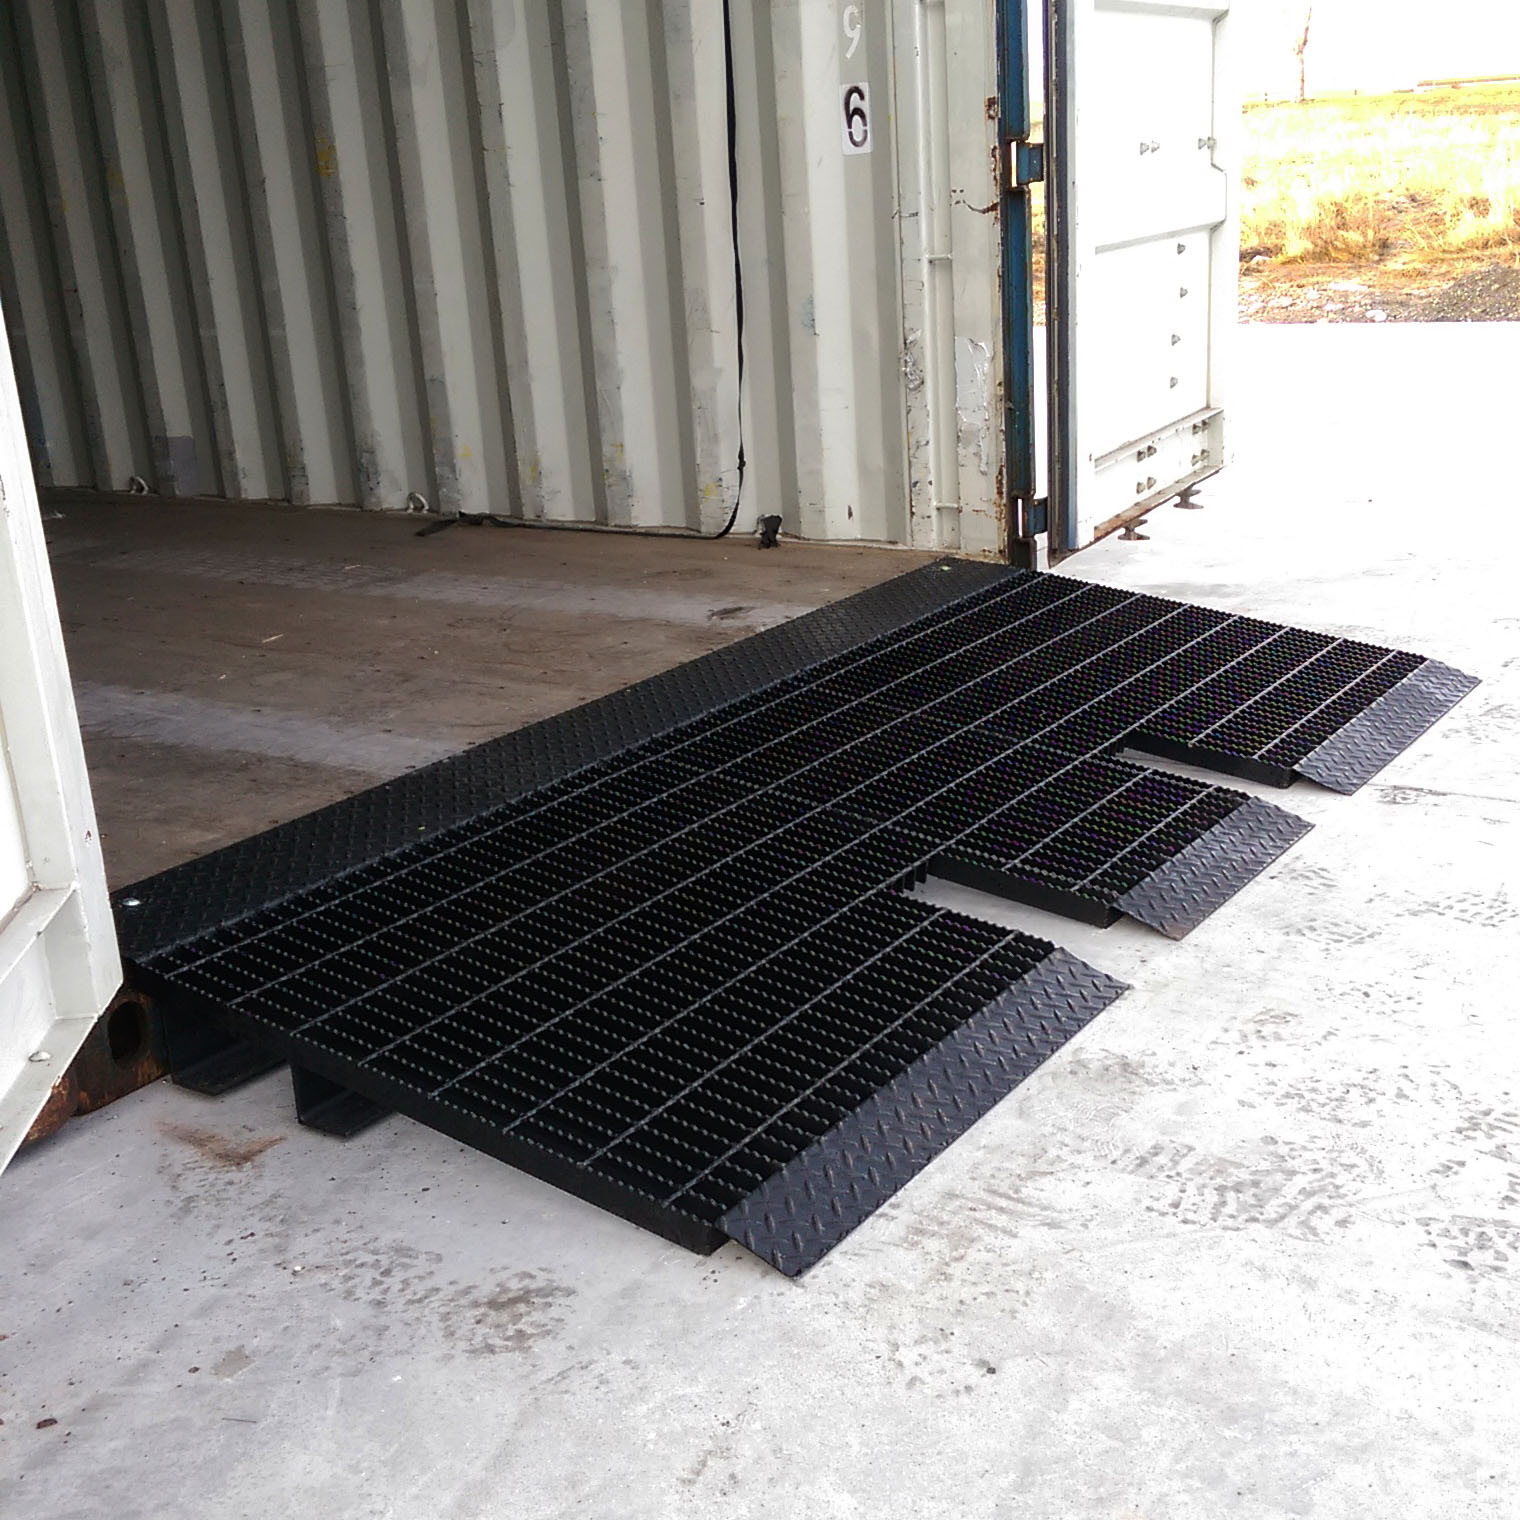 Shipping container ramp for forklifts